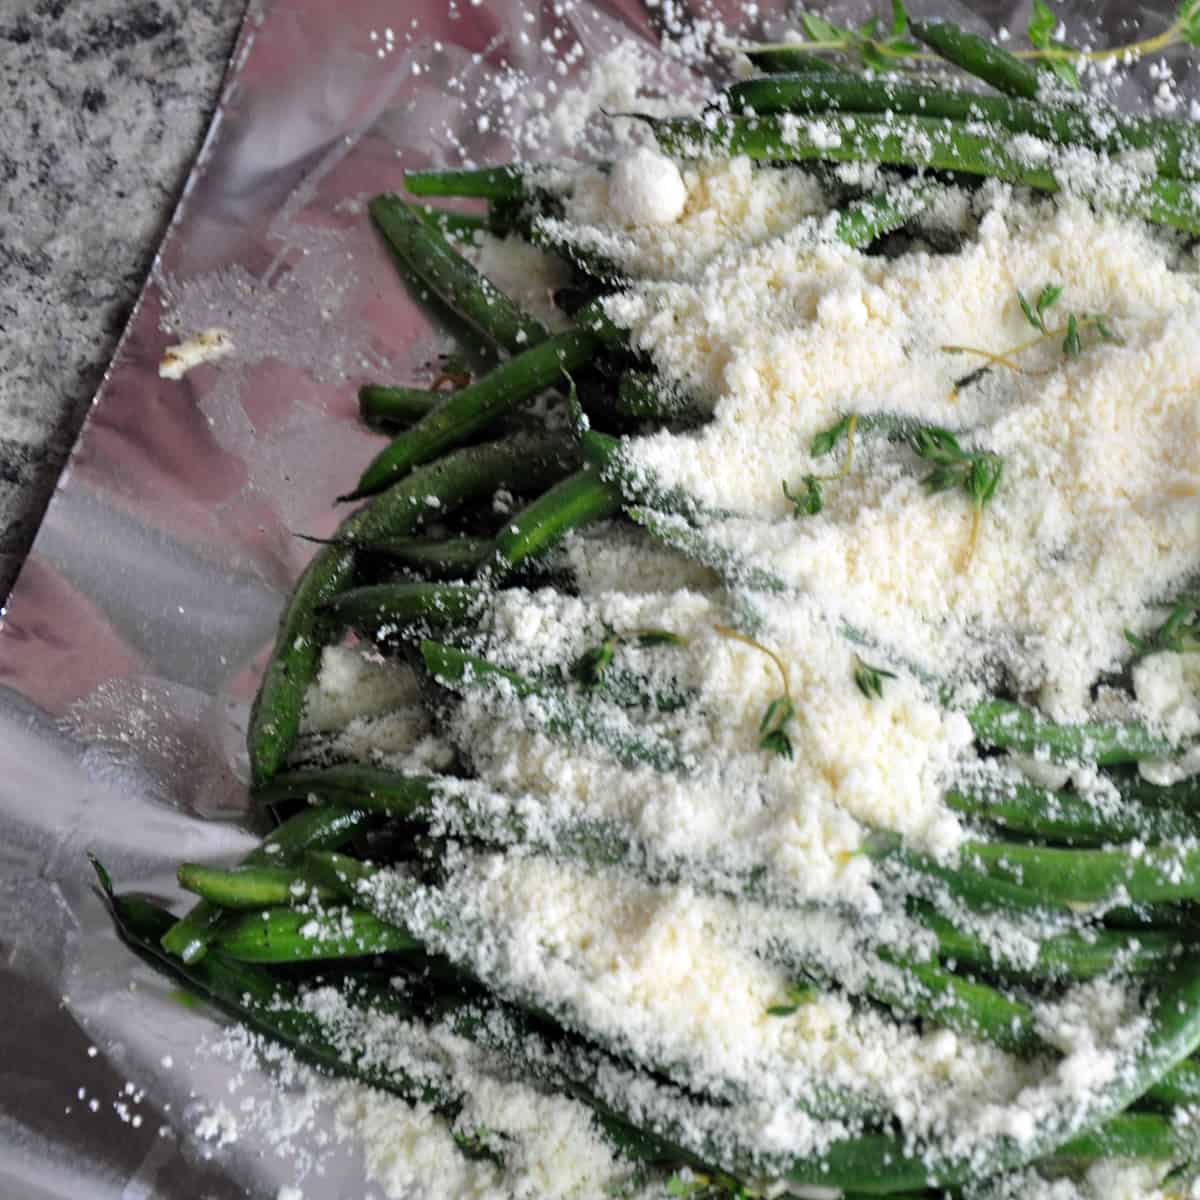 Parmesan cheese on green beans.